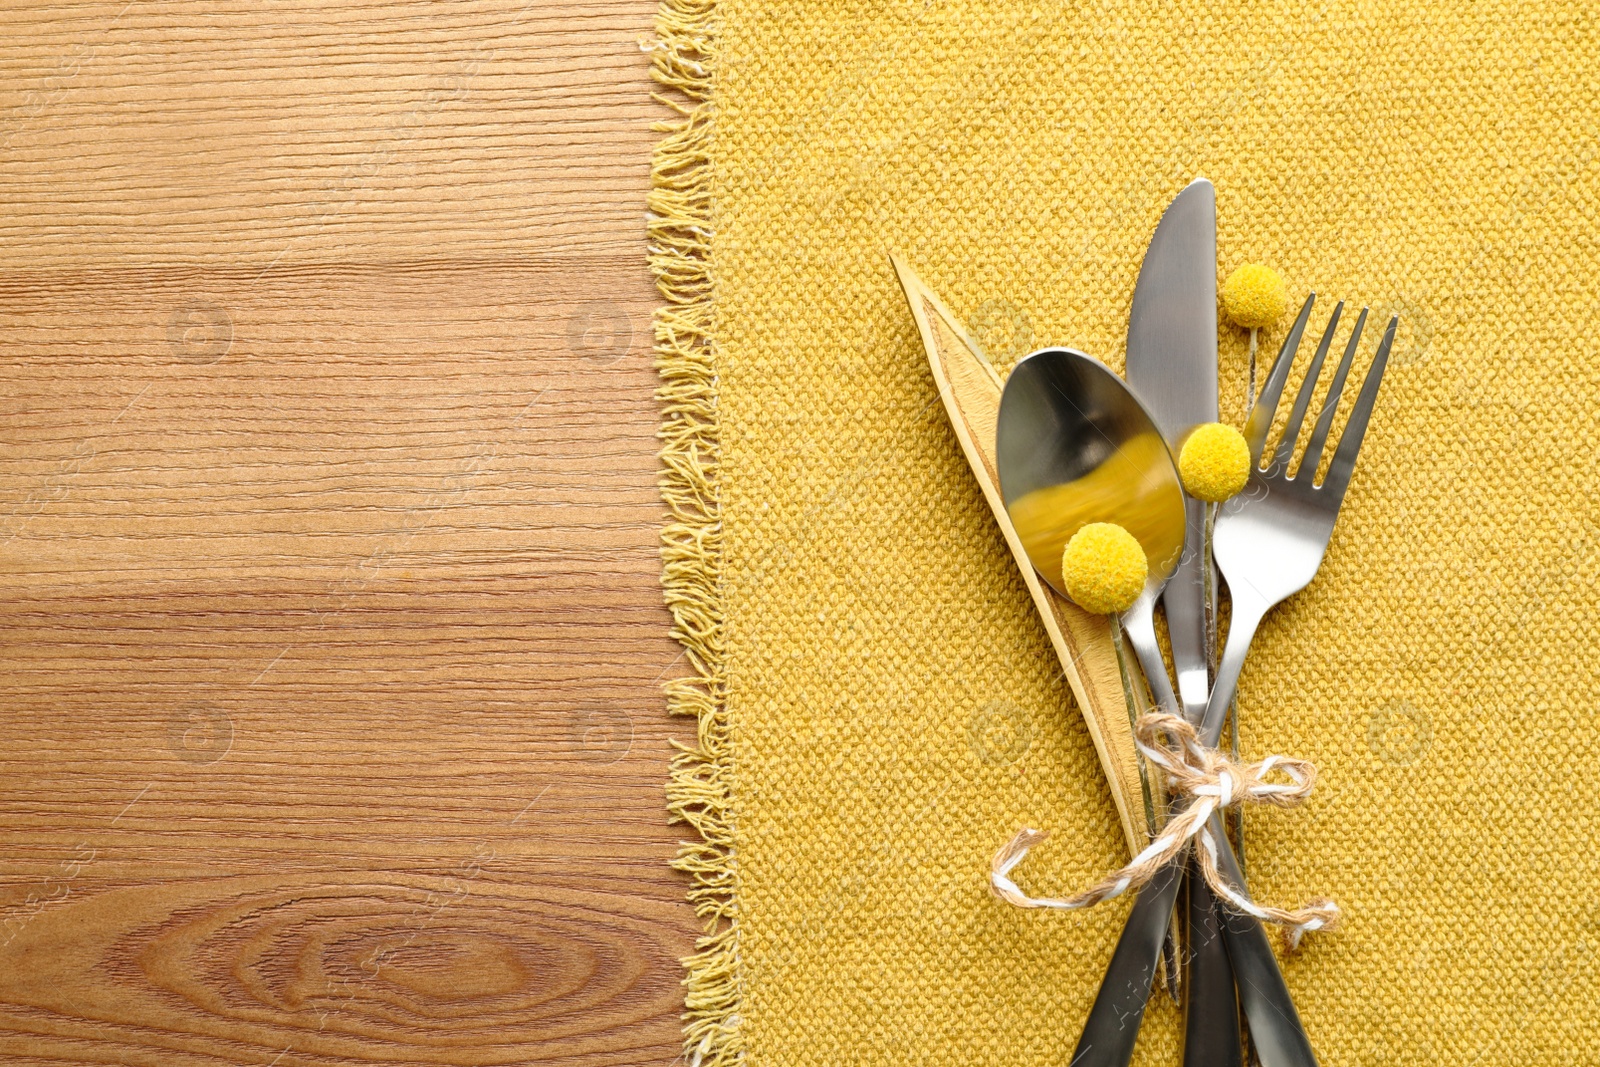 Photo of Set of cutlery, yellow cloth and autumnal decor on wooden background, flat lay with space for text. Table setting elements